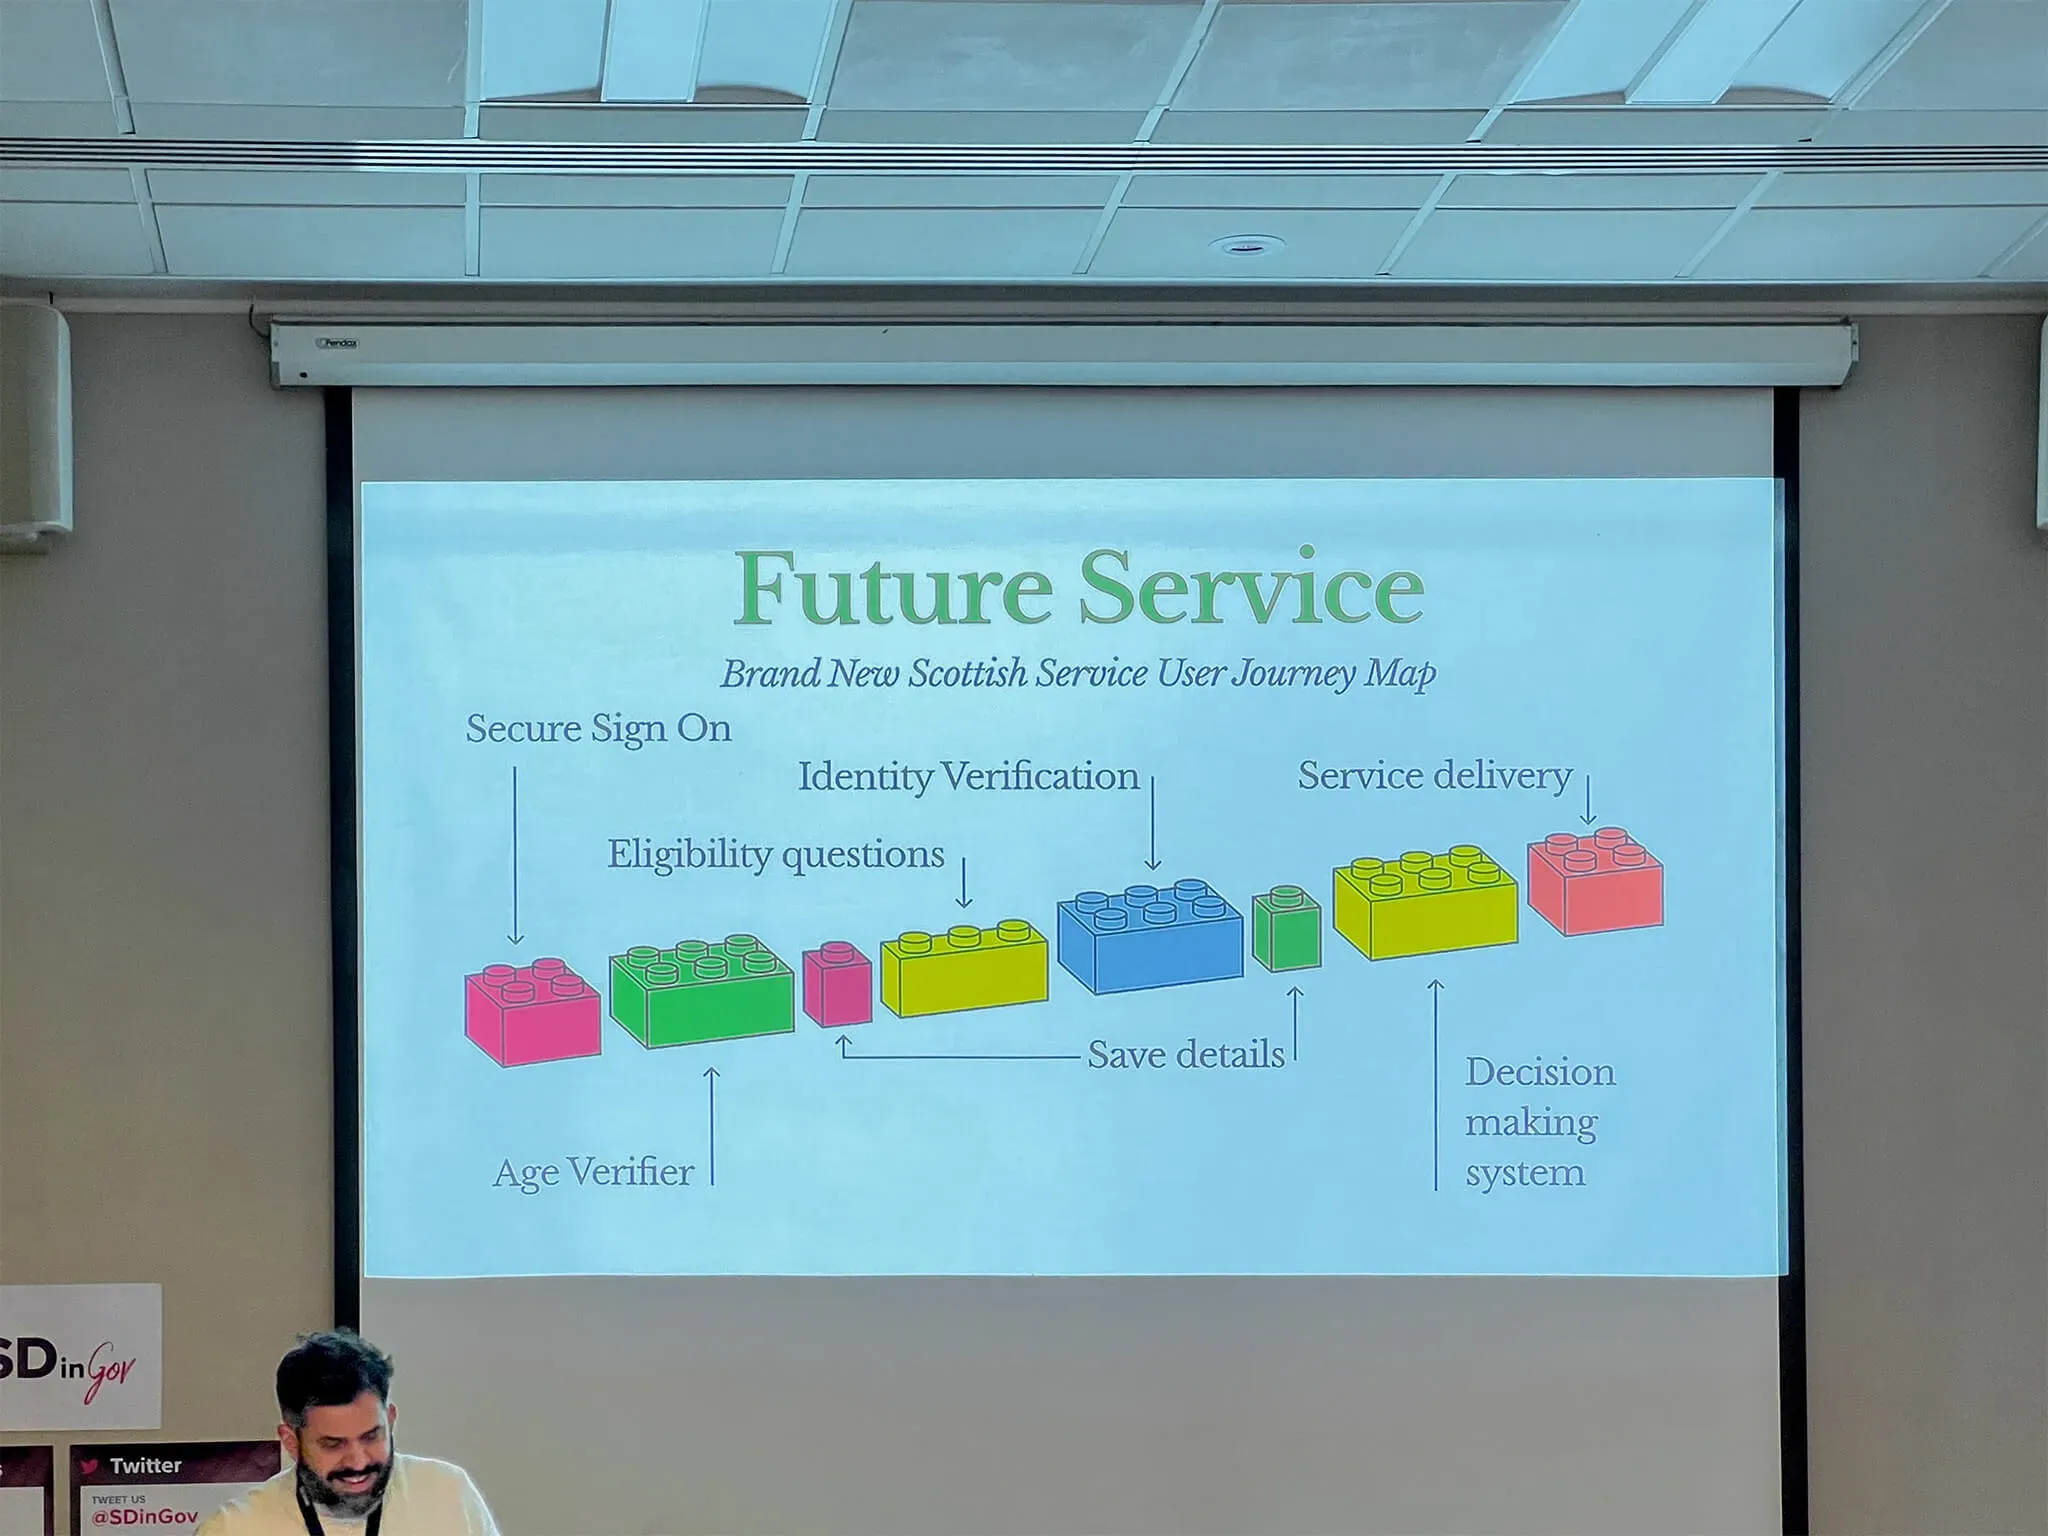 Fritz Von Runte presenting at SD in Gov. On the screen is a collection of Lego bricks representing a digital service. Each brick is a microservice, such as secure sign-on, eligibility questions, identity verification and decision making system.